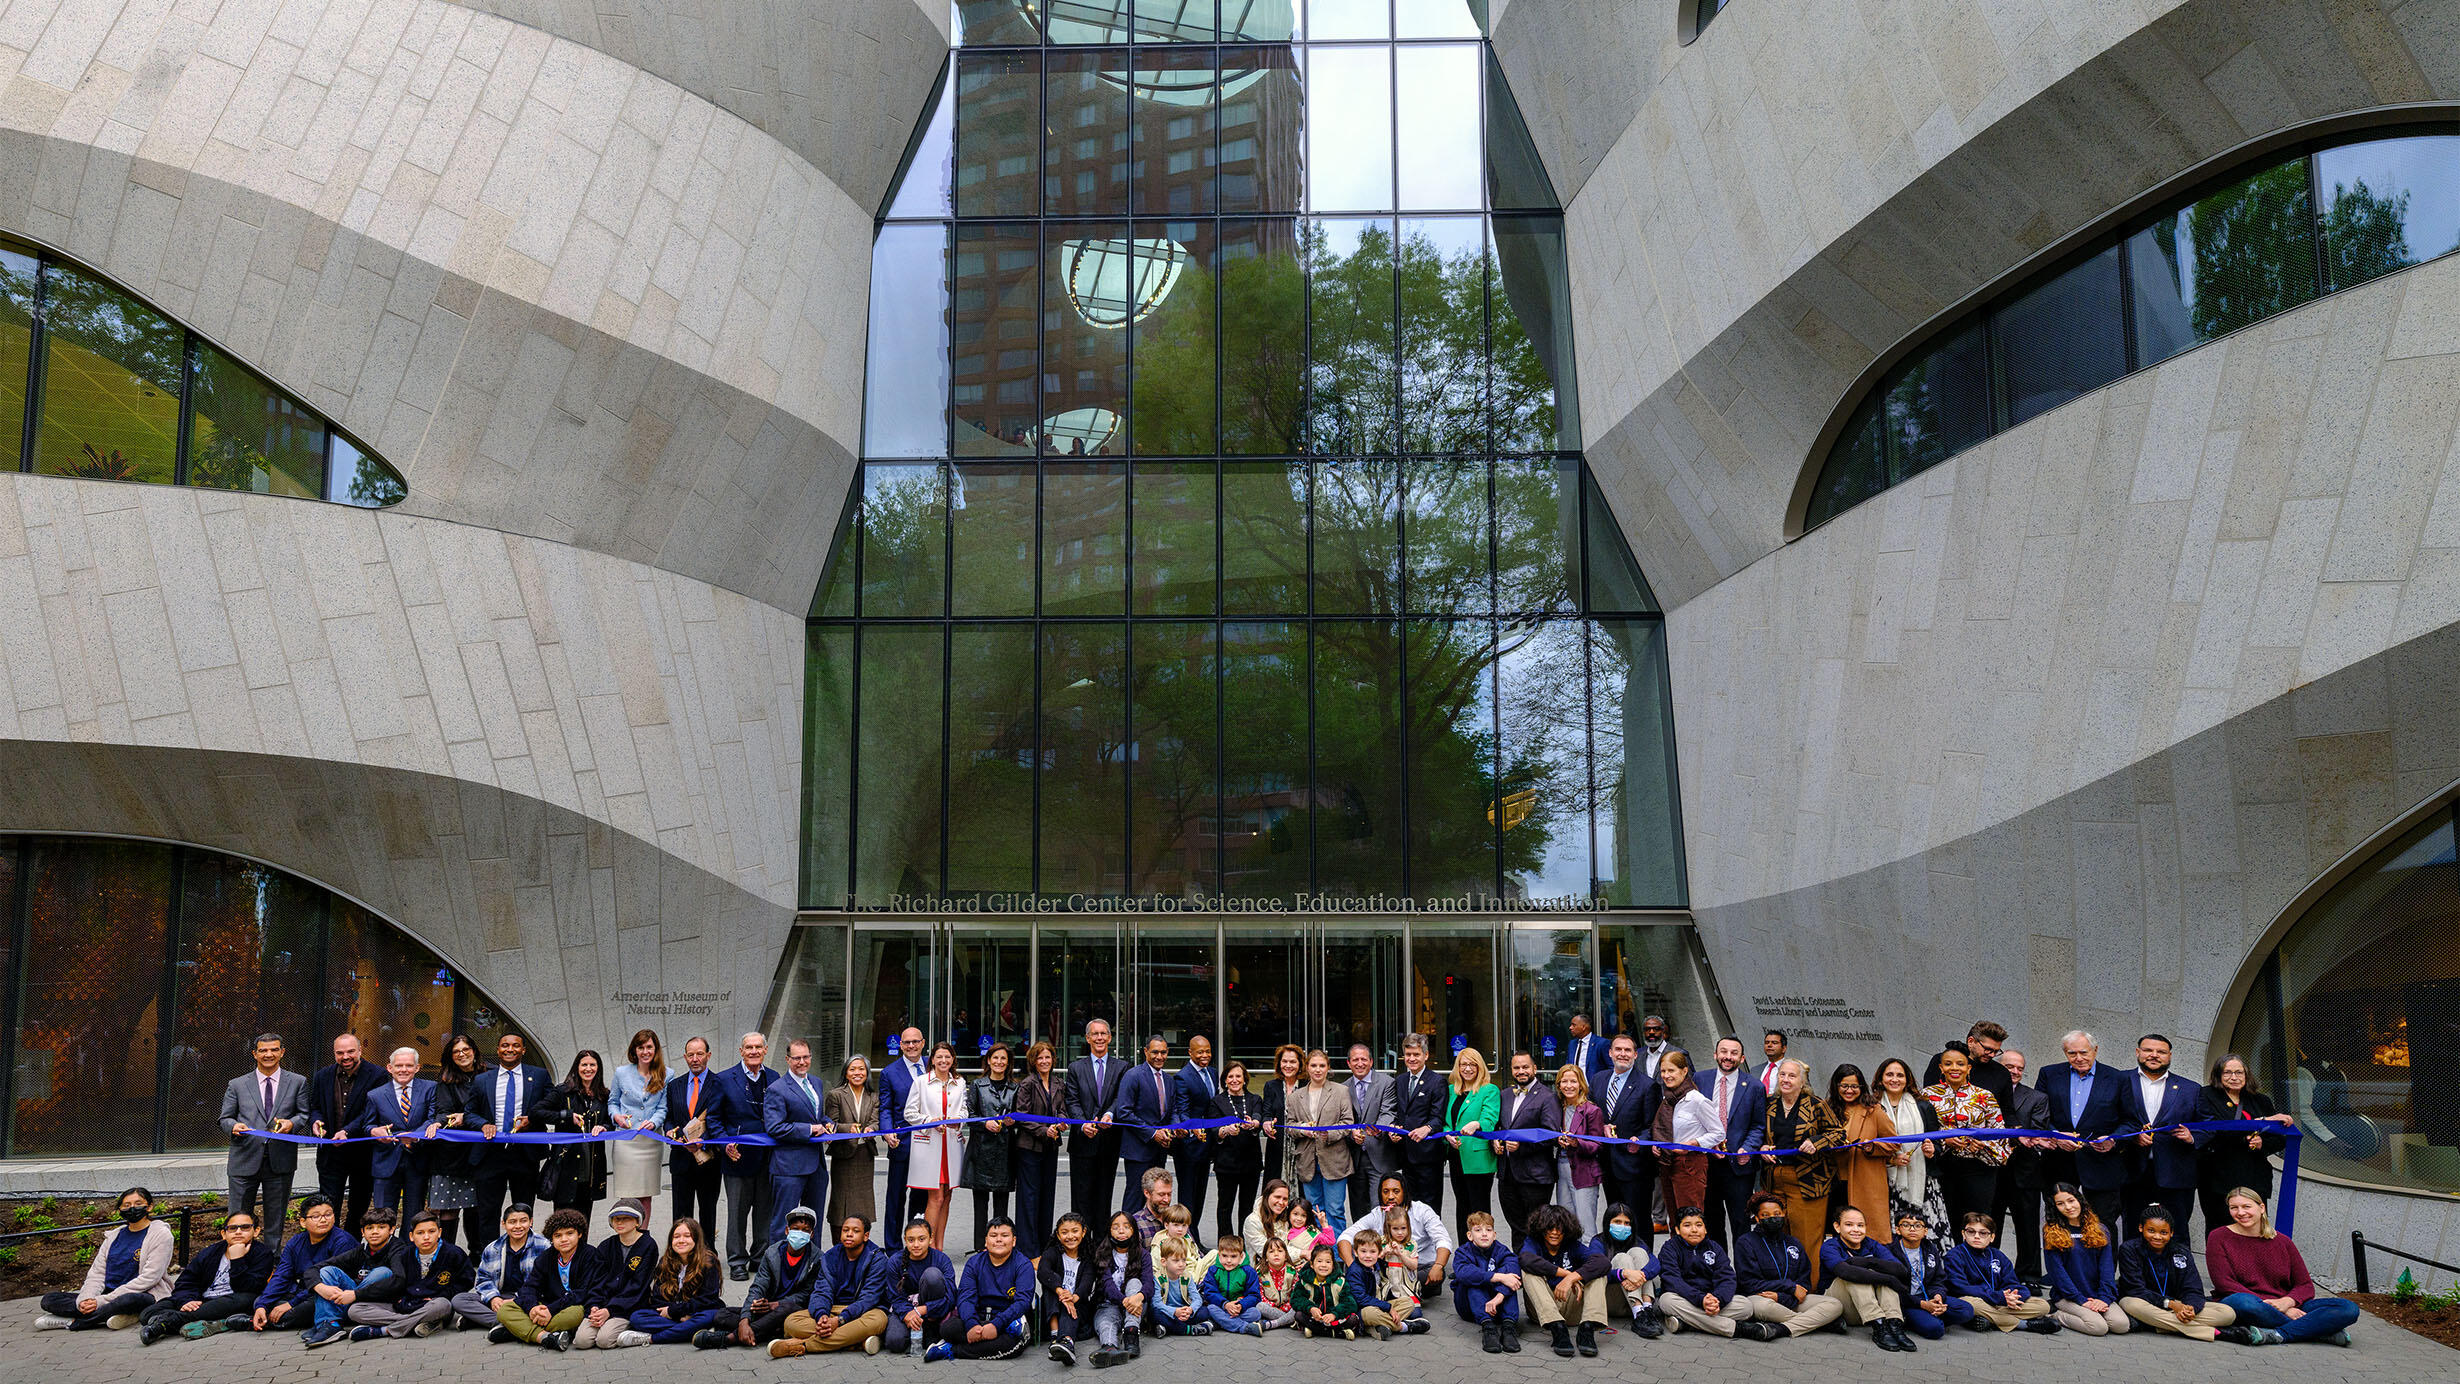 Over 70 people pose in front of the Gilder Center in two rows, with adults standing in back holding a long ribbon and children sitting in front.